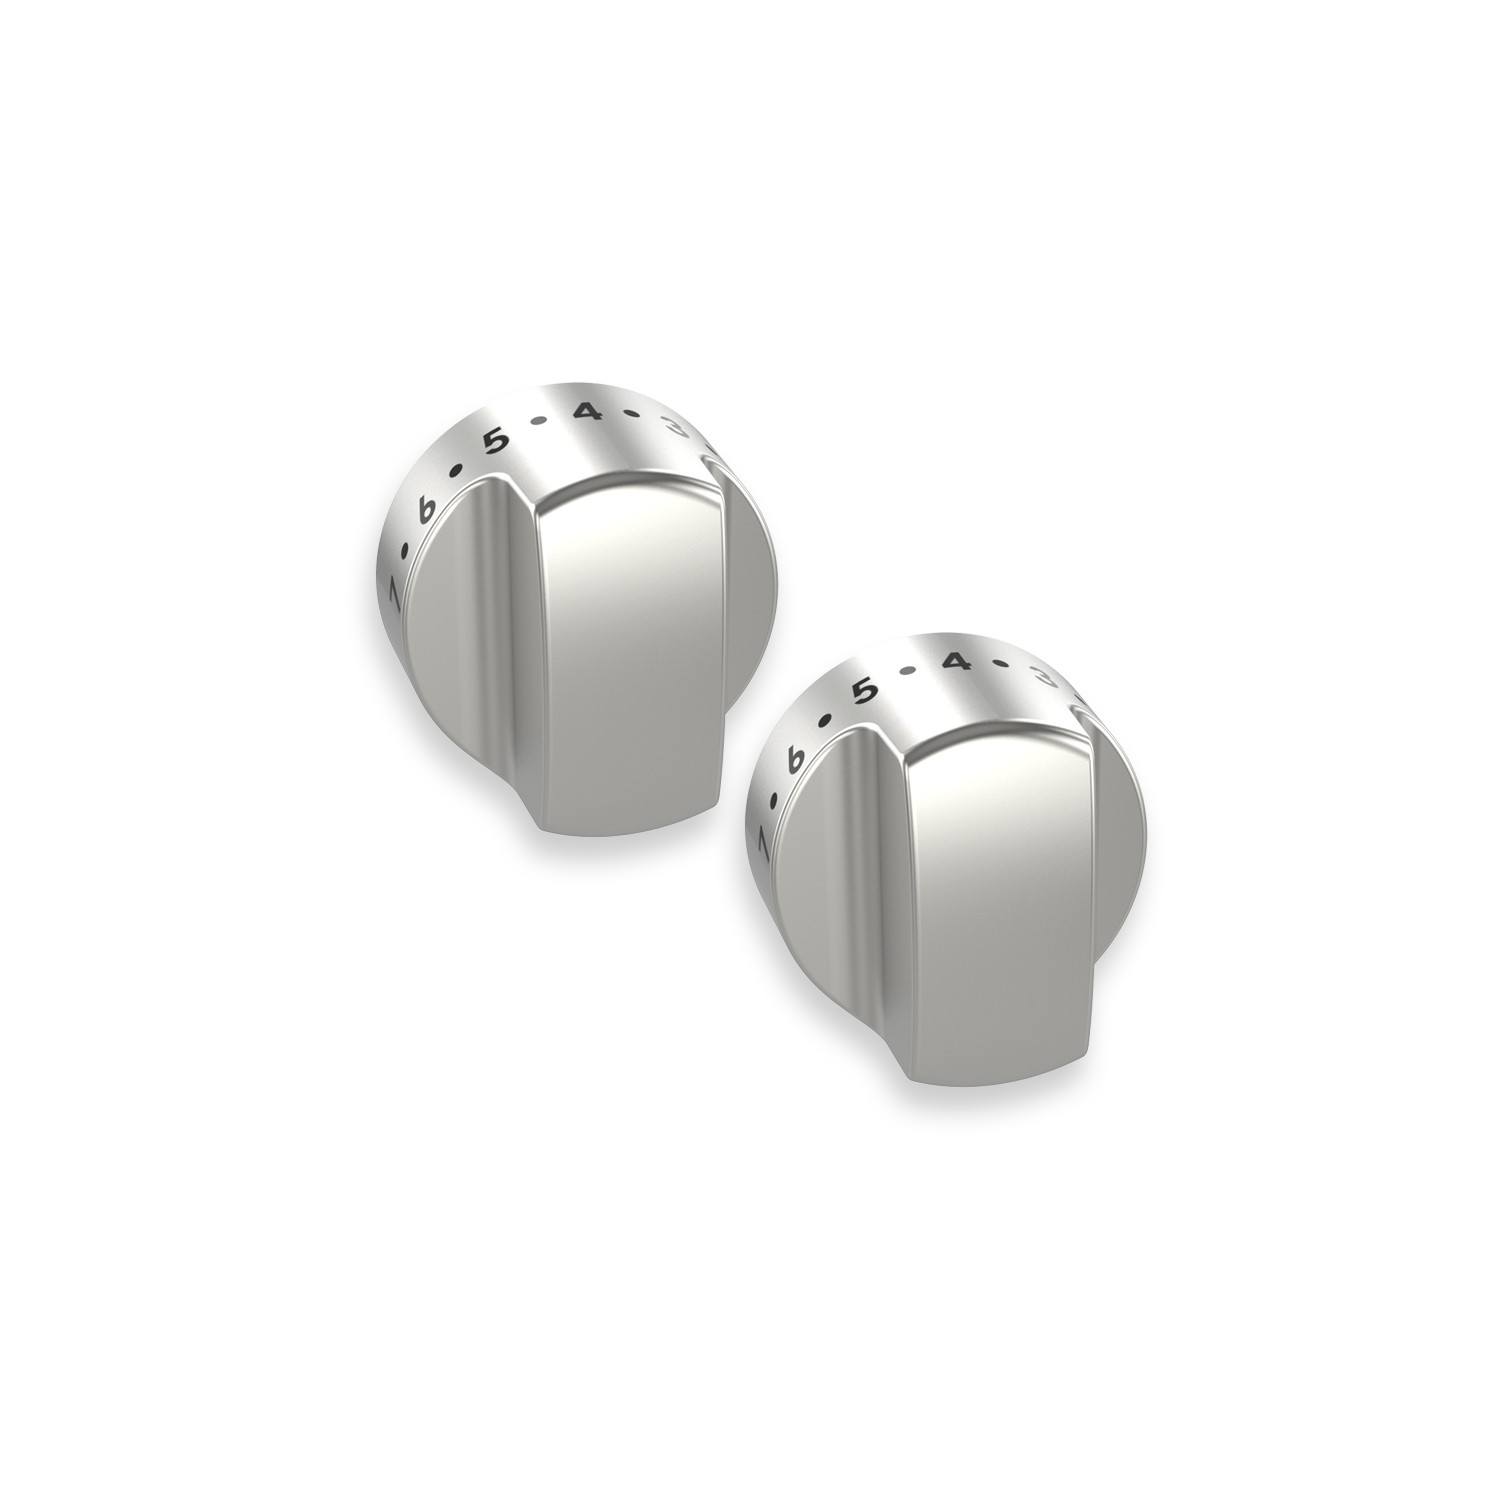 Four Slice Toaster Knob - Brushed Stainless